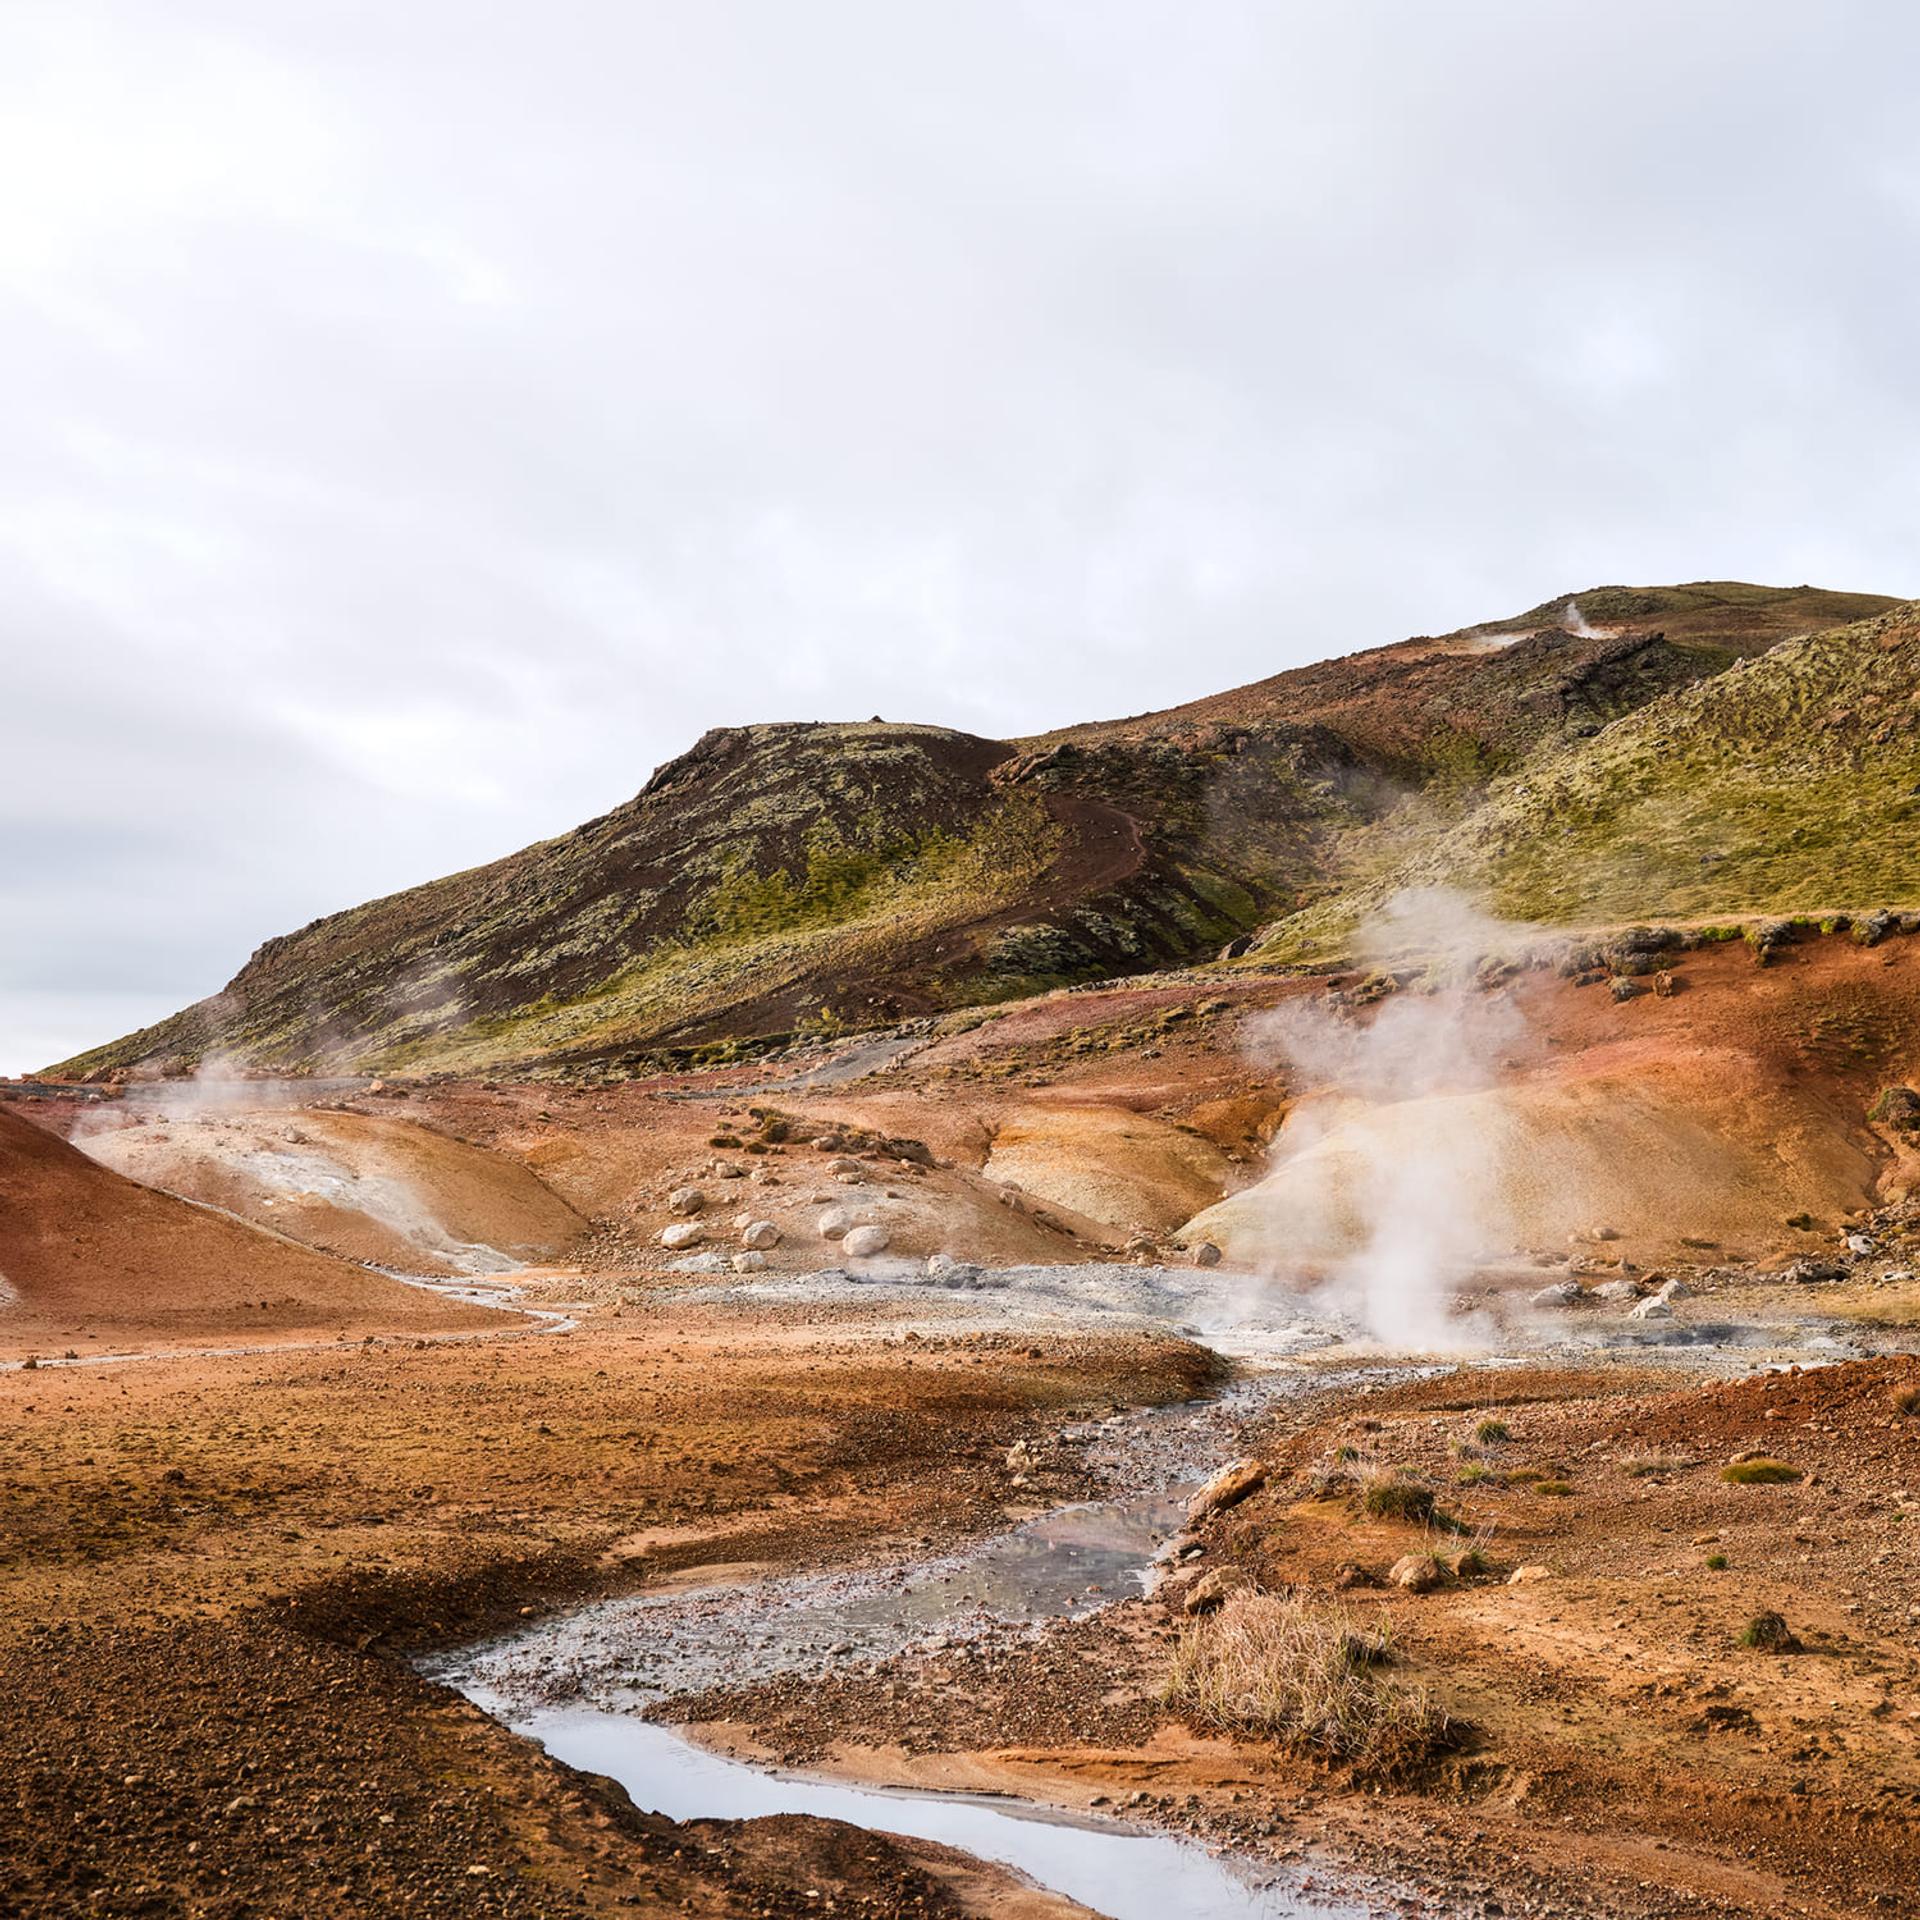 Volcanic Hills in Reykjavik with steam blowing through the Earth